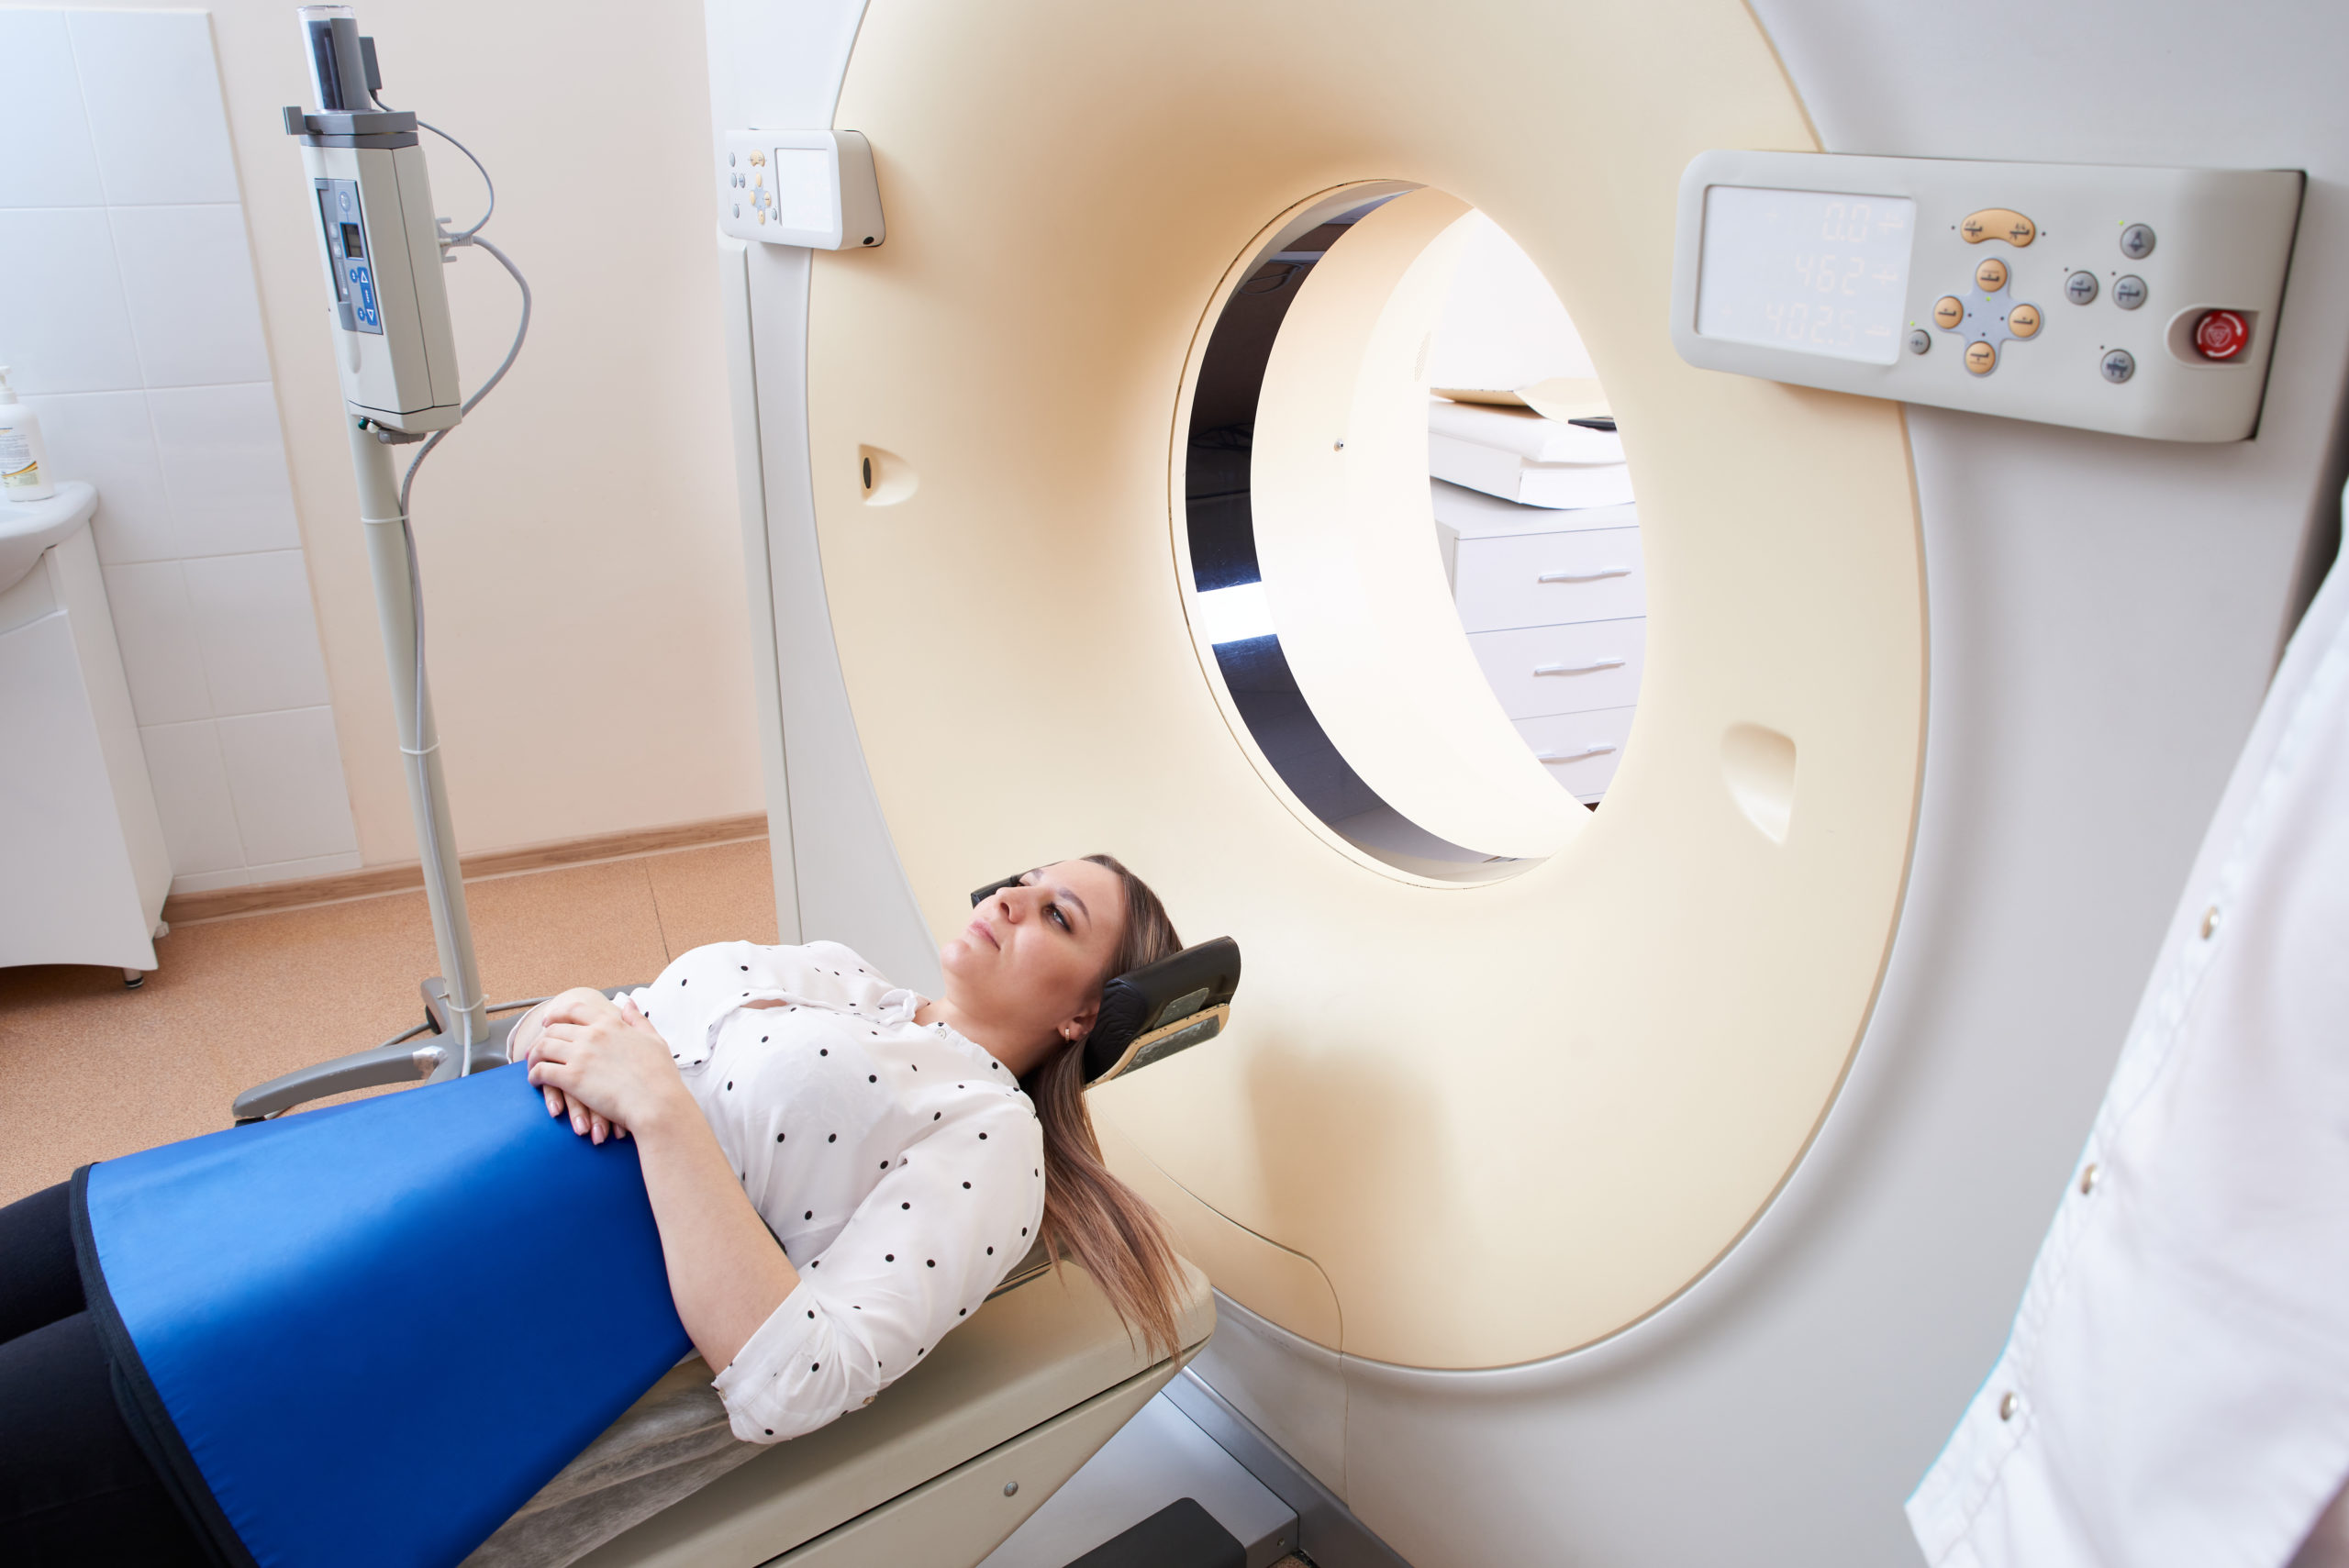 https://mrt-diomag.ru/wp-content/uploads/2021/03/female-patient-undergoing-mri-magnetic-resonance-imaging-in-hospital-medical-equipment-and-health-care-concept-scaled.jpg